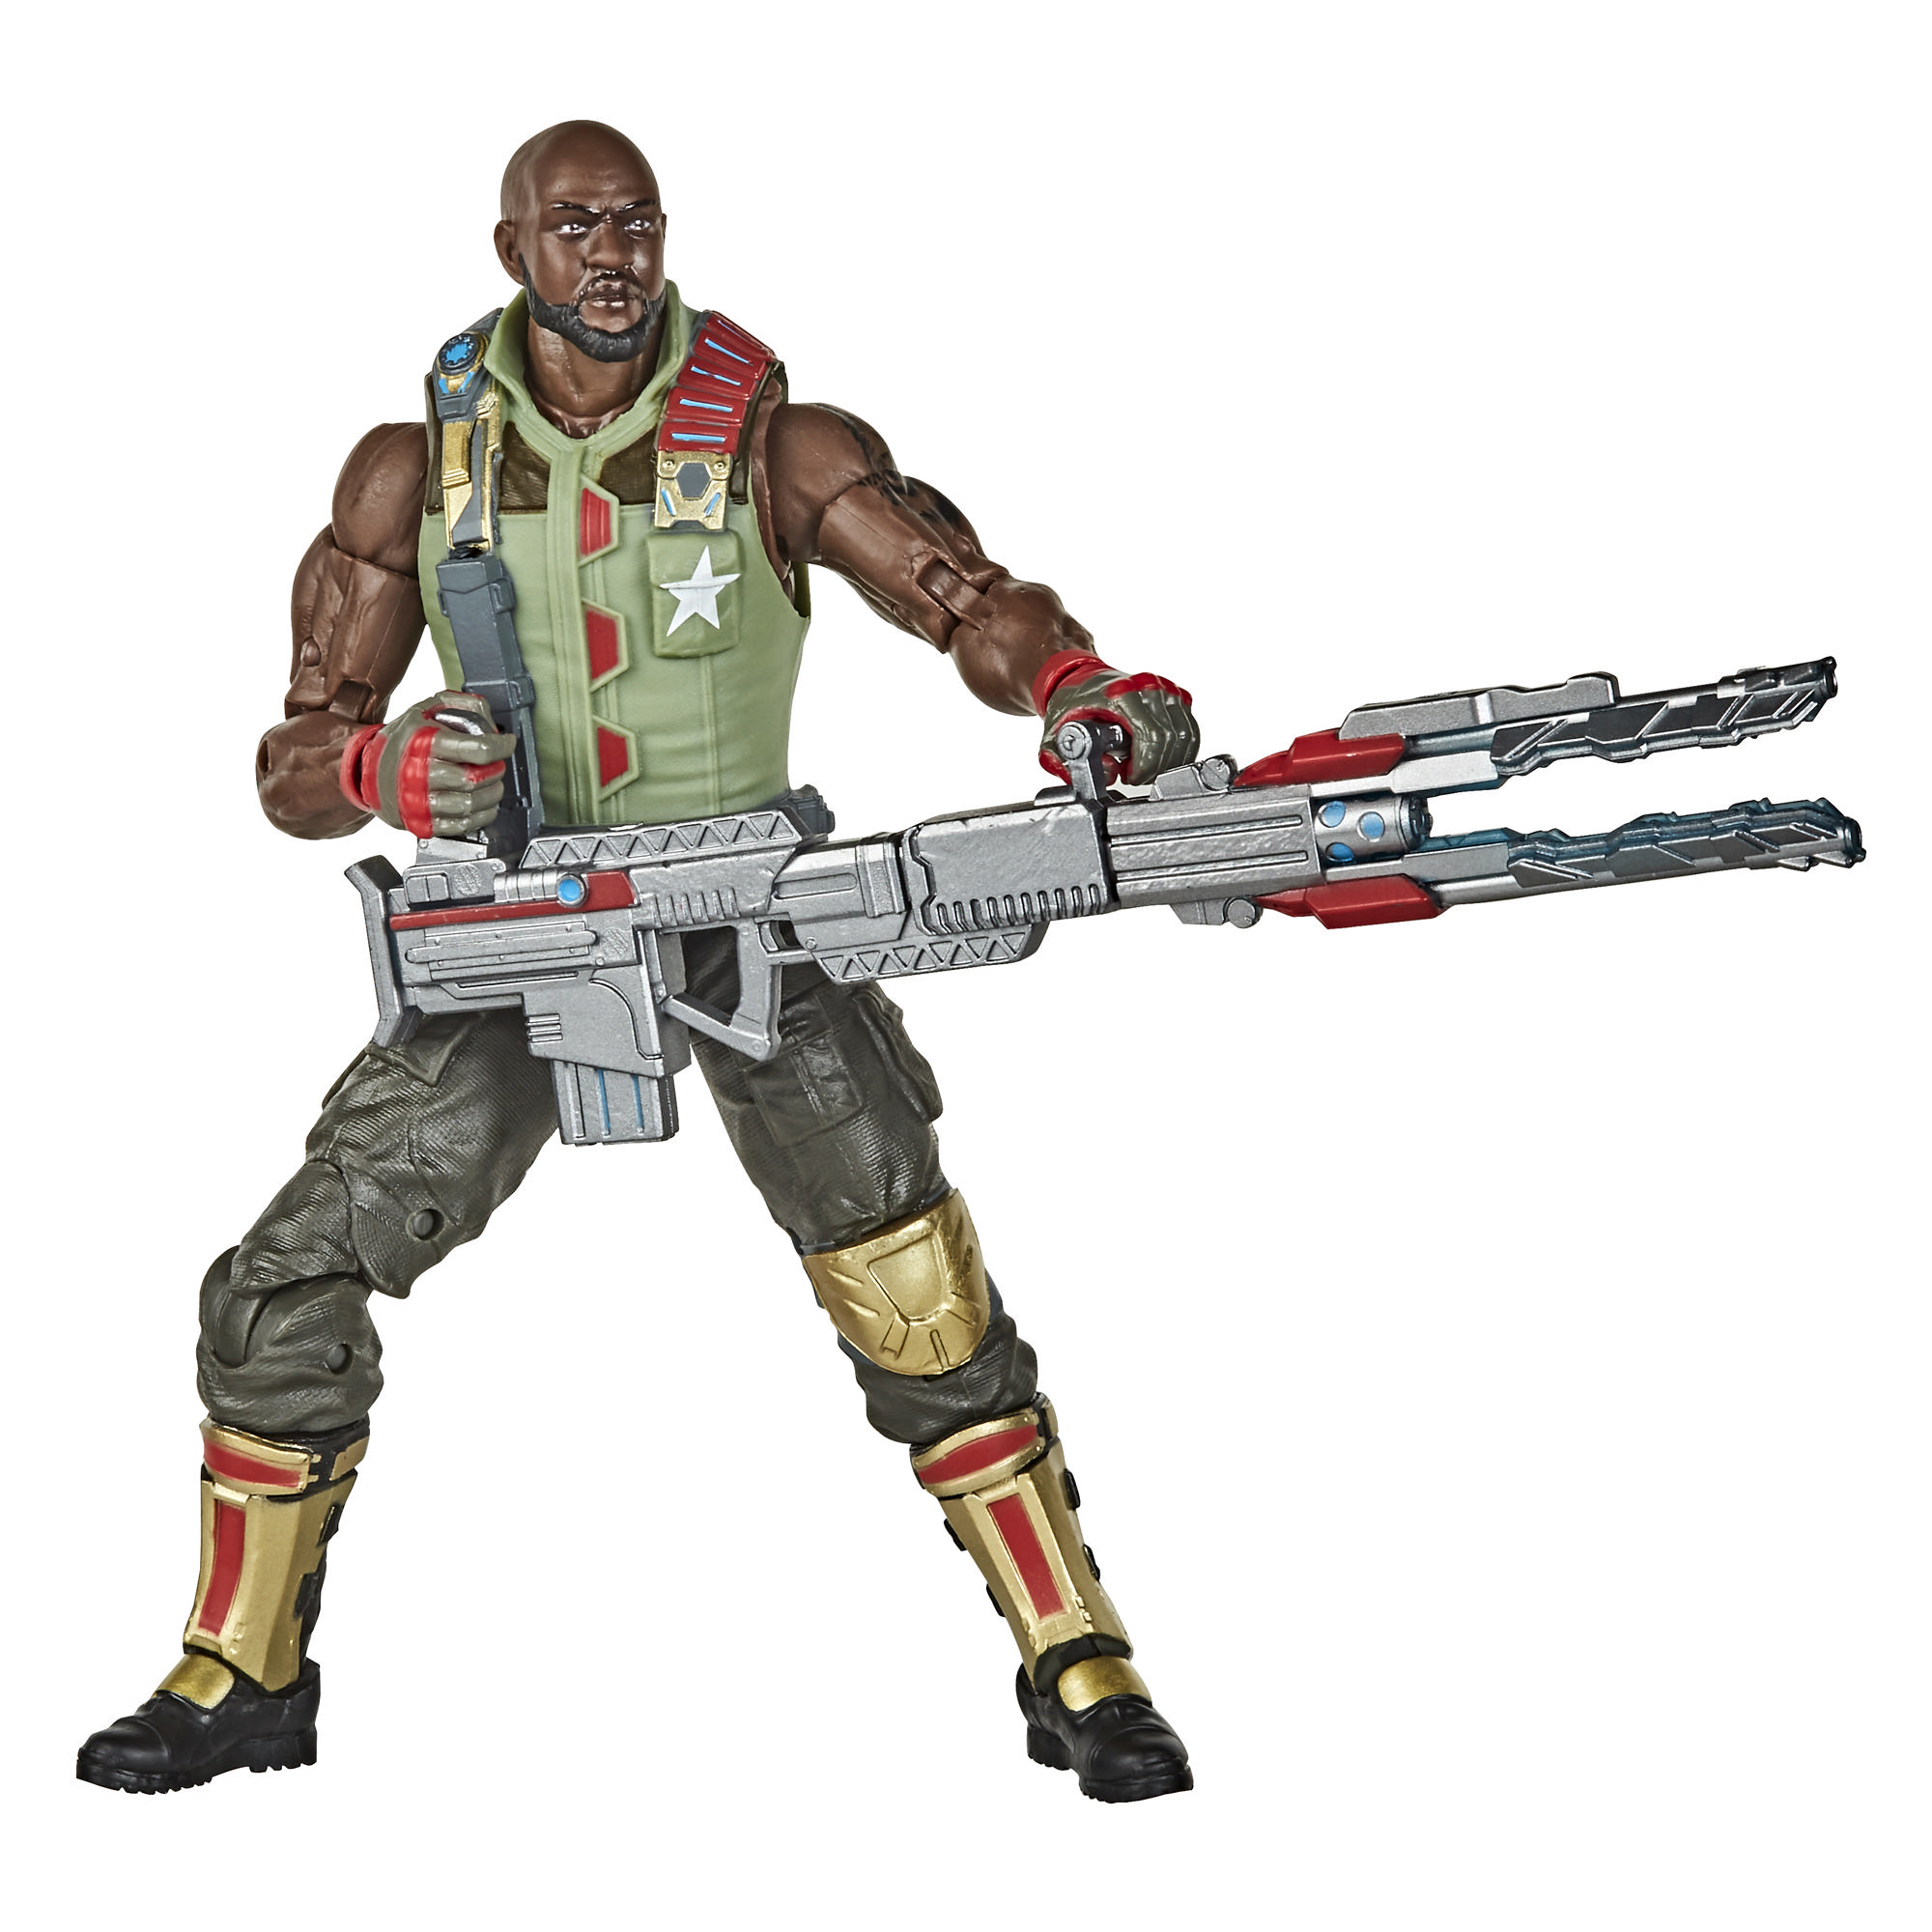 G.I. Joe Classified Series Roadblock Action Figure 01 Collectible Toy with Multiple Accessories